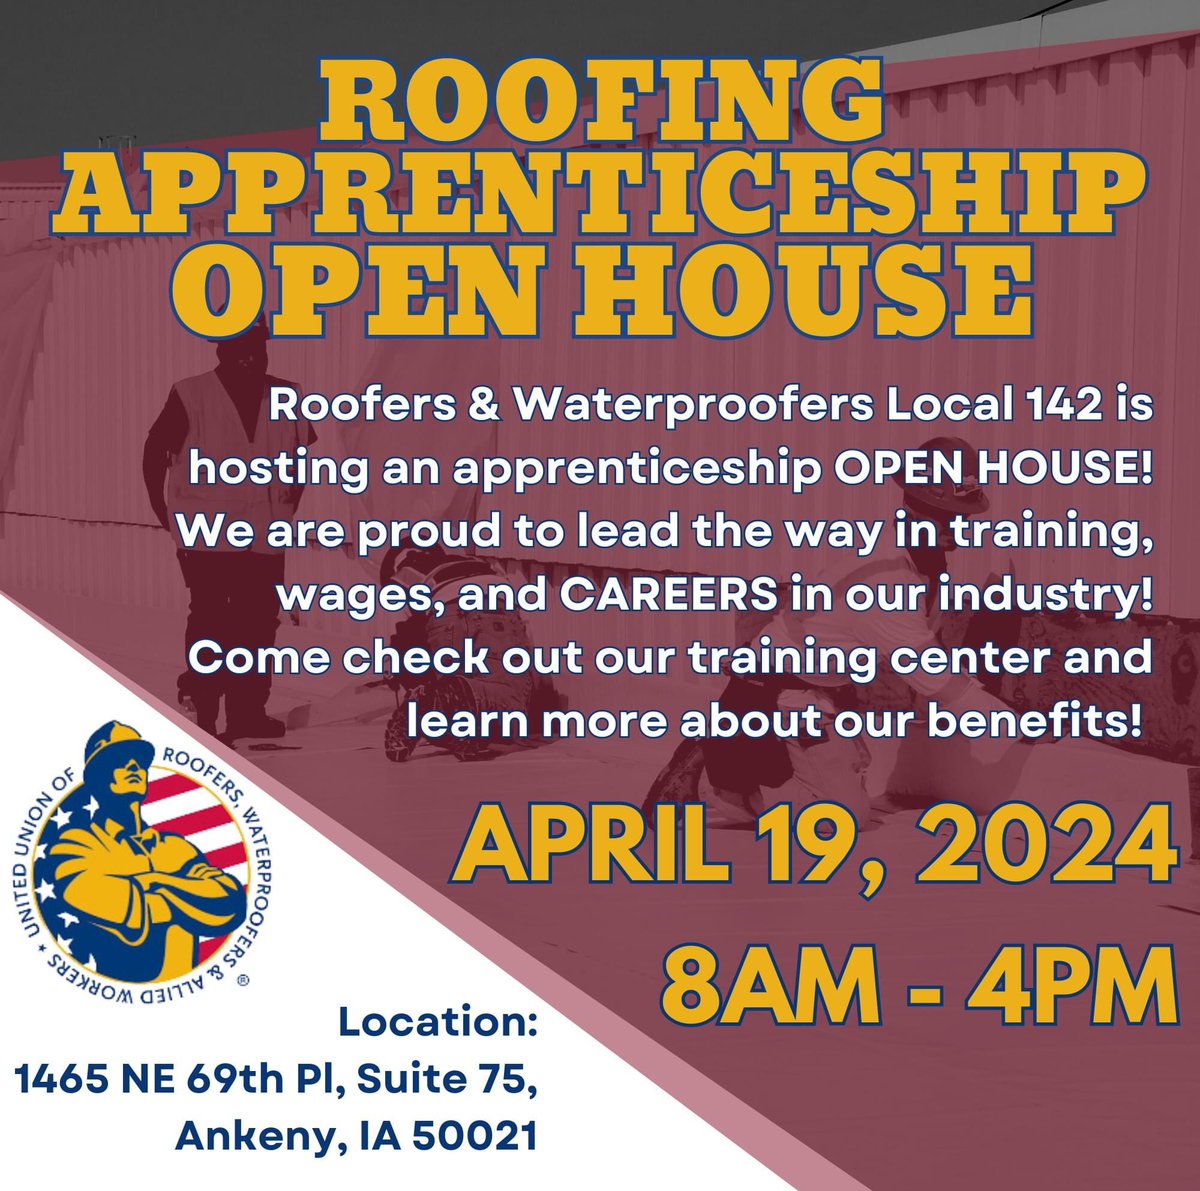 Awesome opportunity to learn more about Roofers Local Union 142 and their growing apprenticeship! Mark your calendar!

#iowaskilledtrades #iowaconstruction #IowaWorkforce #perry